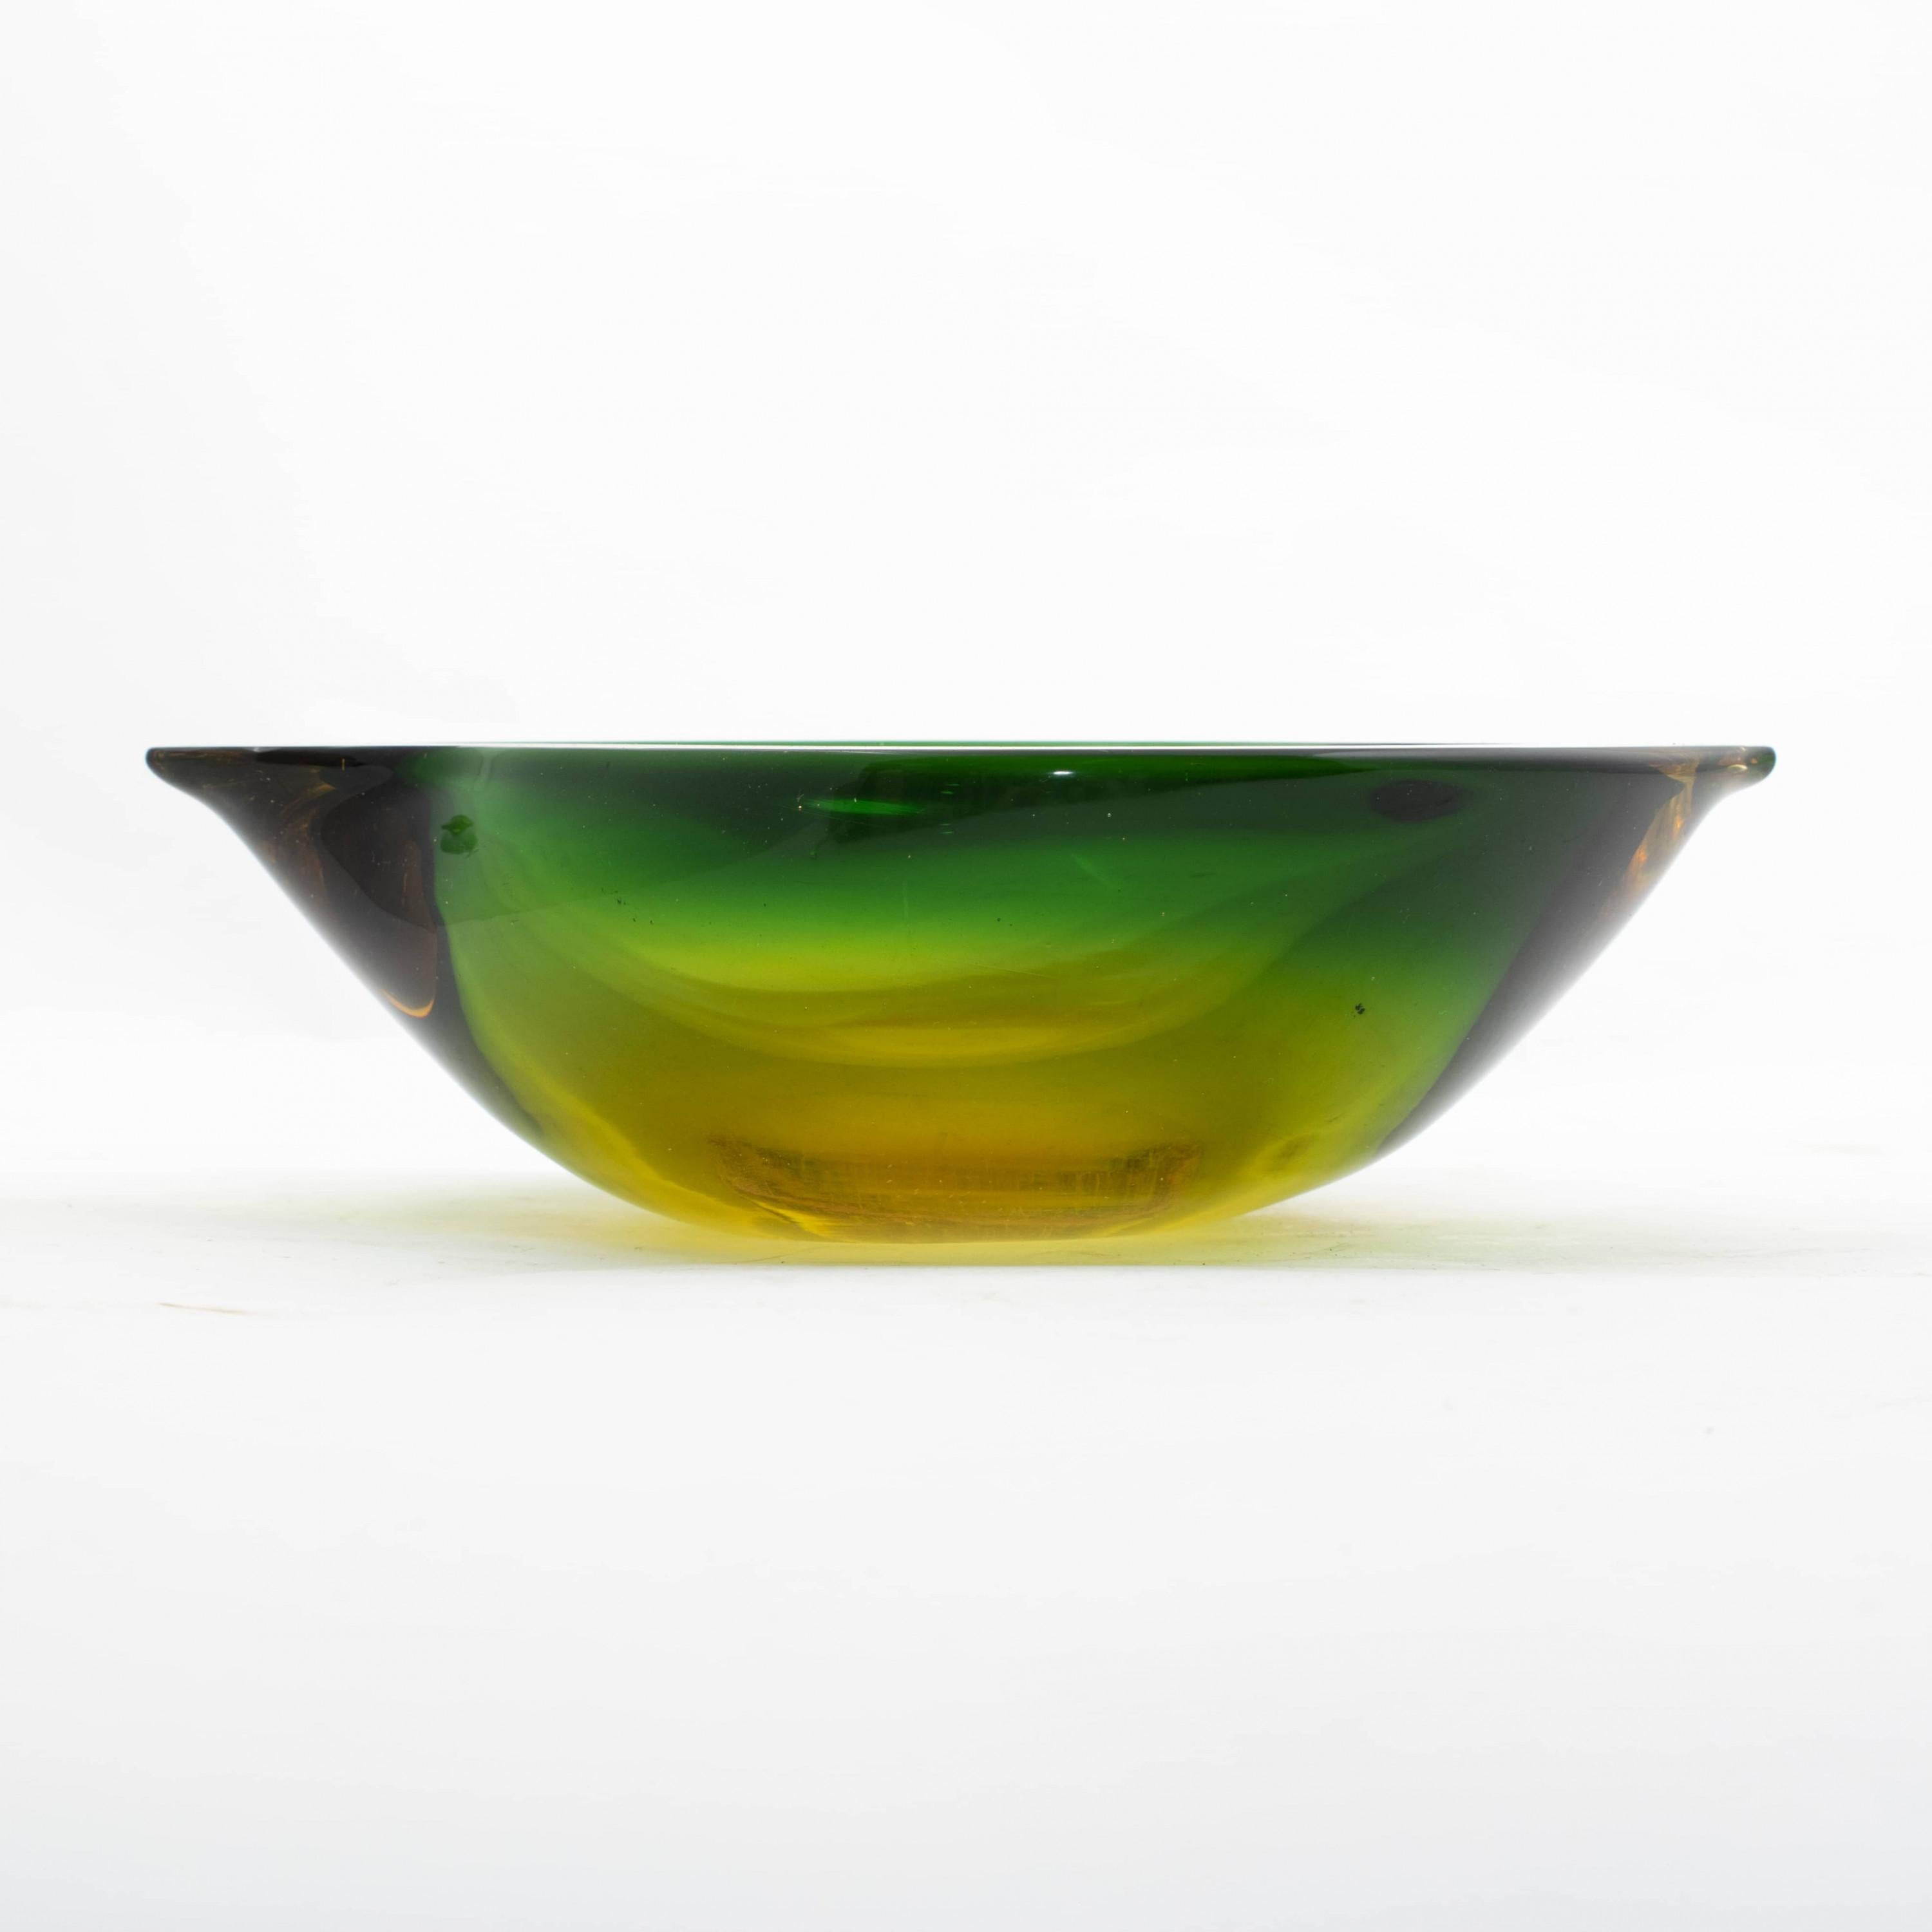 Small bowl or ashtray in Murano glass.
Organic shape with green and amber shades in 